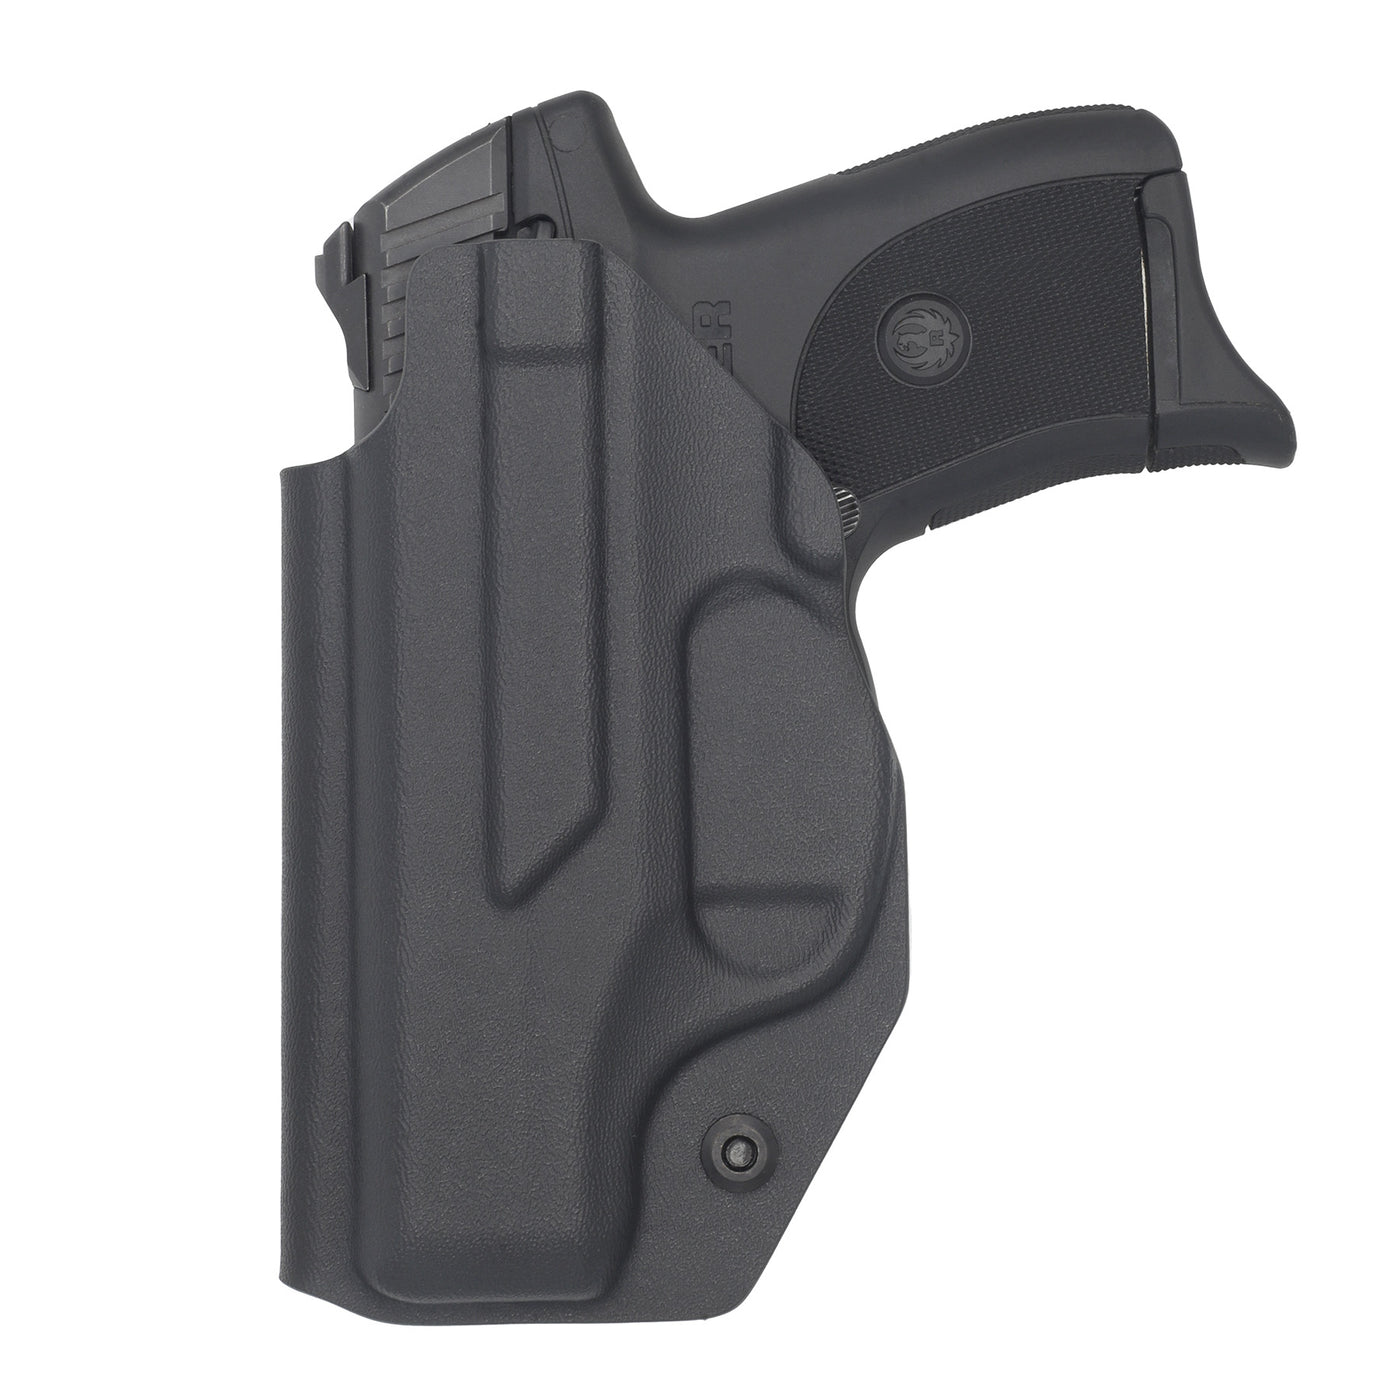 C&G Holsters IWB inside the waistband Holster for the Ruger LC9 EC9 backside